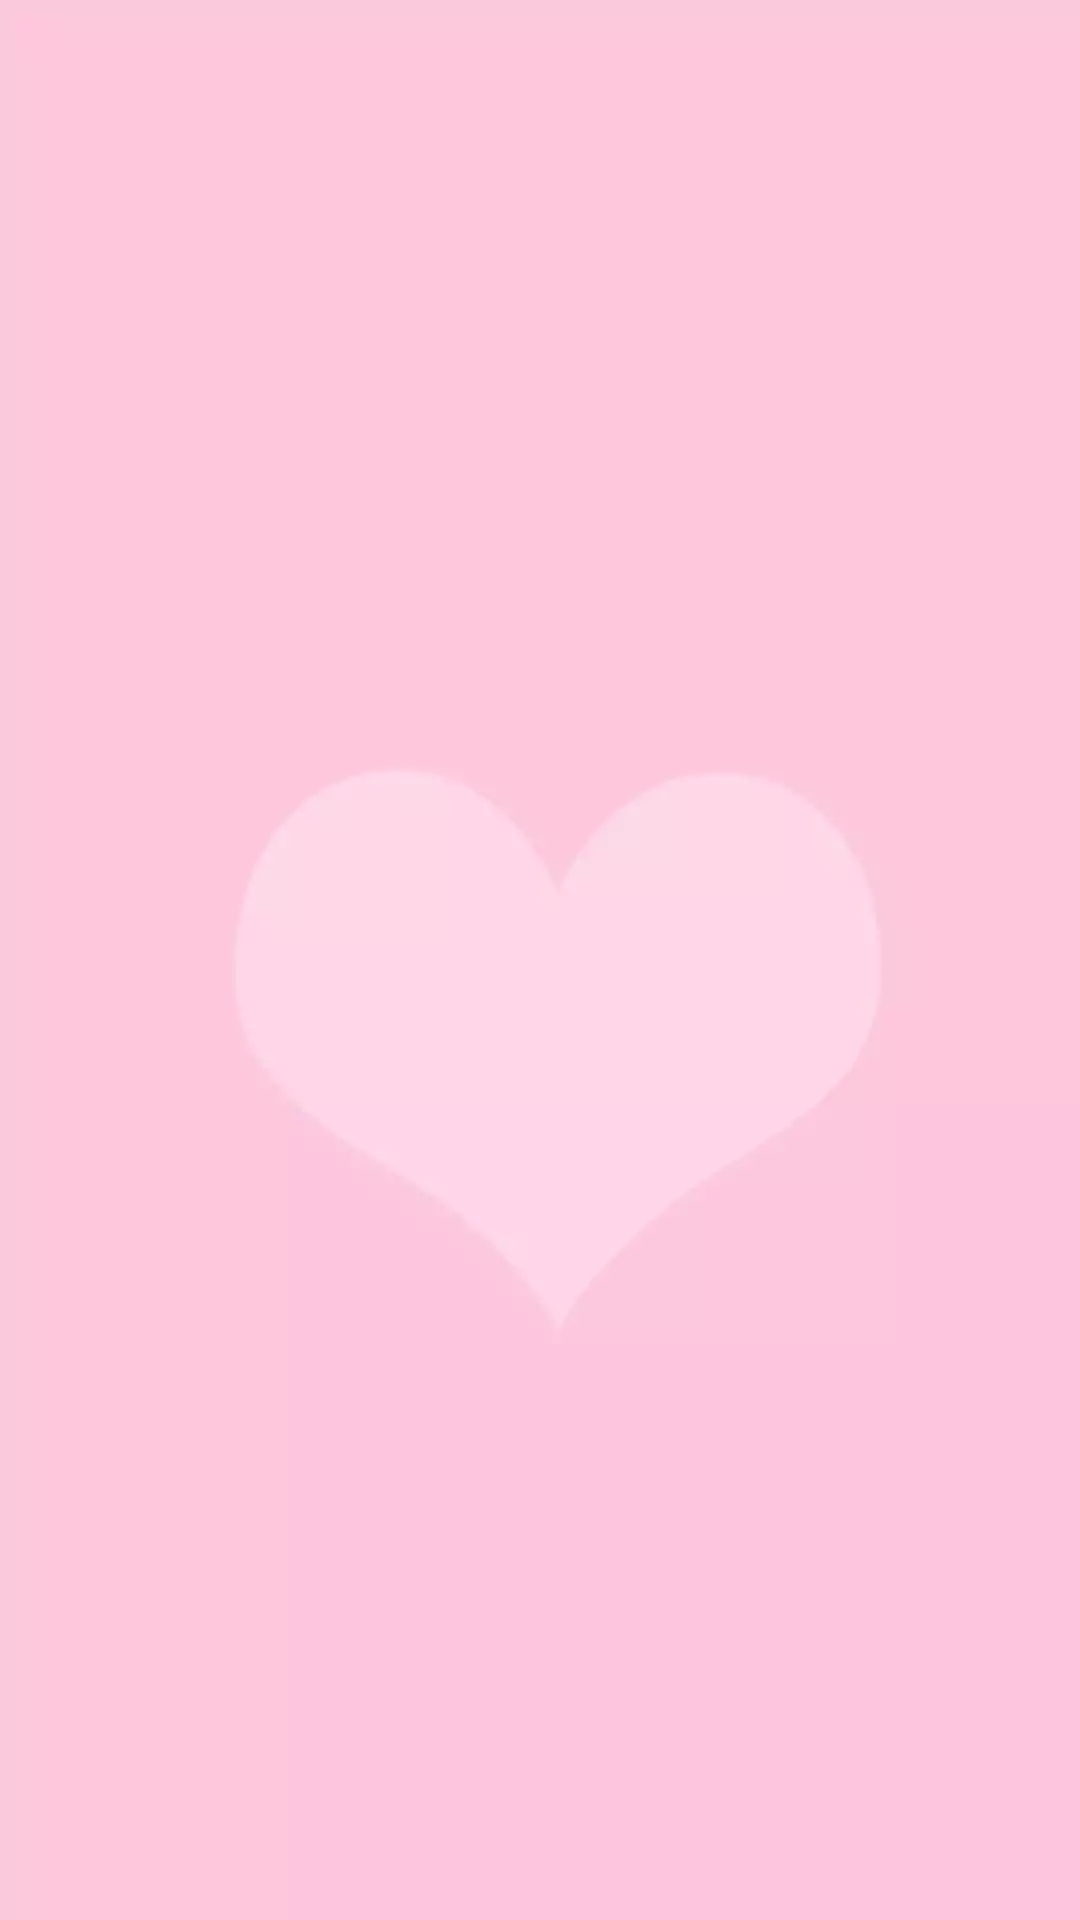 A pink heart shaped background with white lines - Heart, pink heart